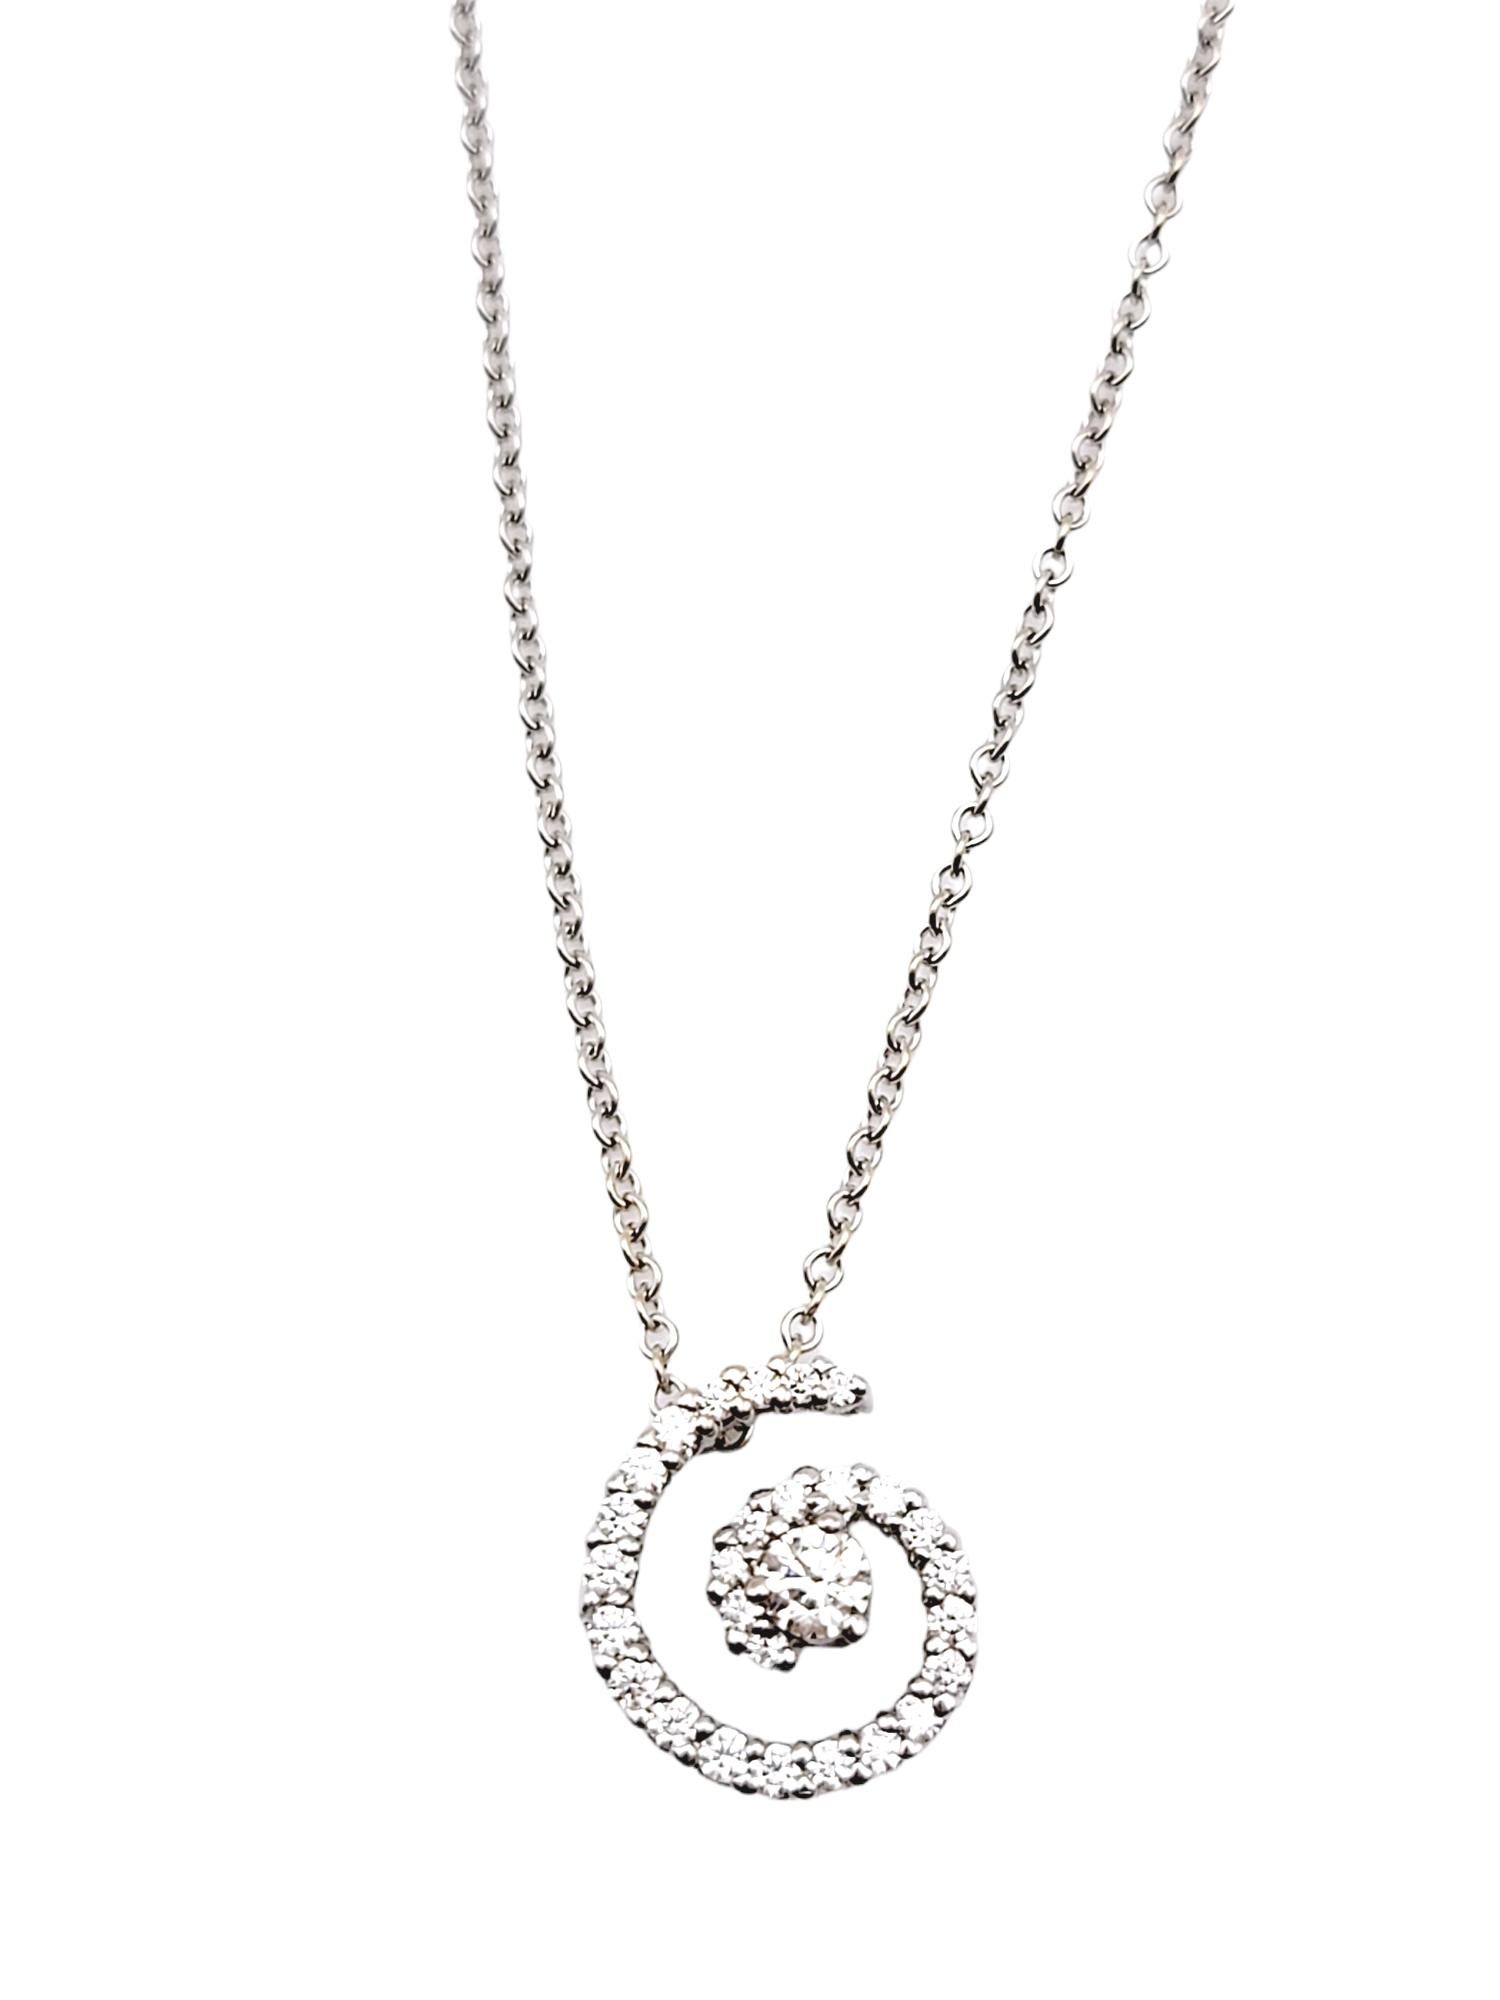 This glittering modern diamond pendant necklace is simple yet chic. The delicate chain and icy spiral of natural round diamonds goes with just about everything. The luxurious 18 karat white gold setting further enhances the white brilliance of the